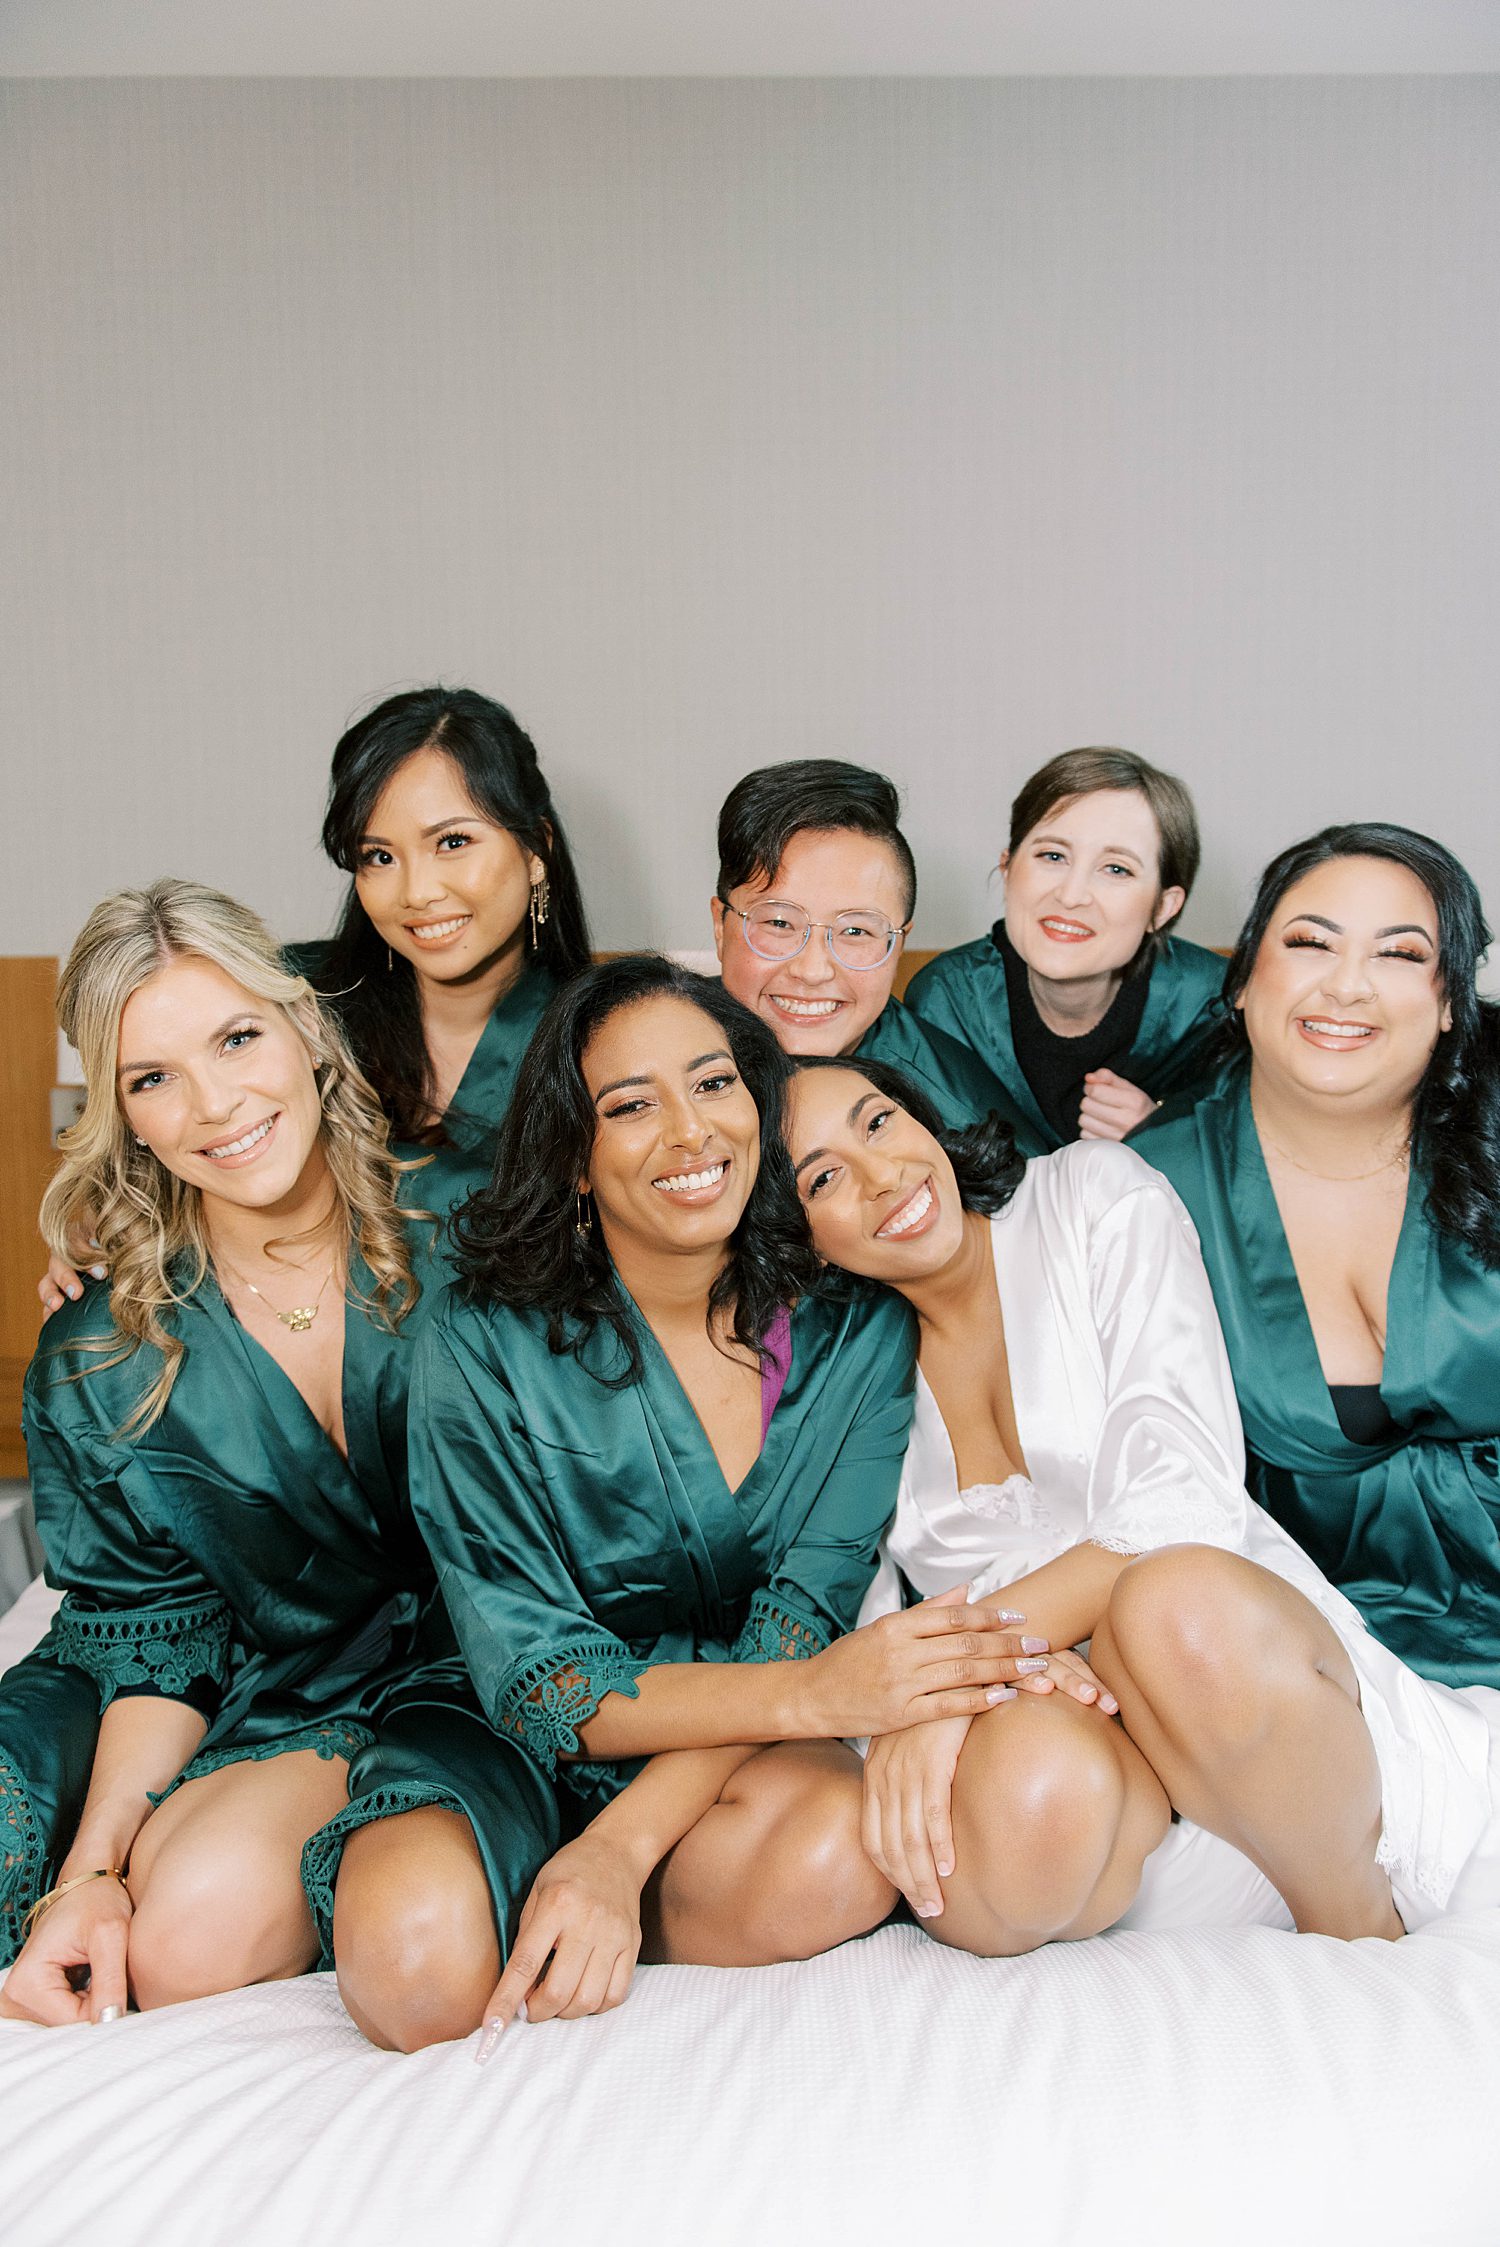 bride smiles with bridesmaids in teal robes leaning on maid of honor's shoulder